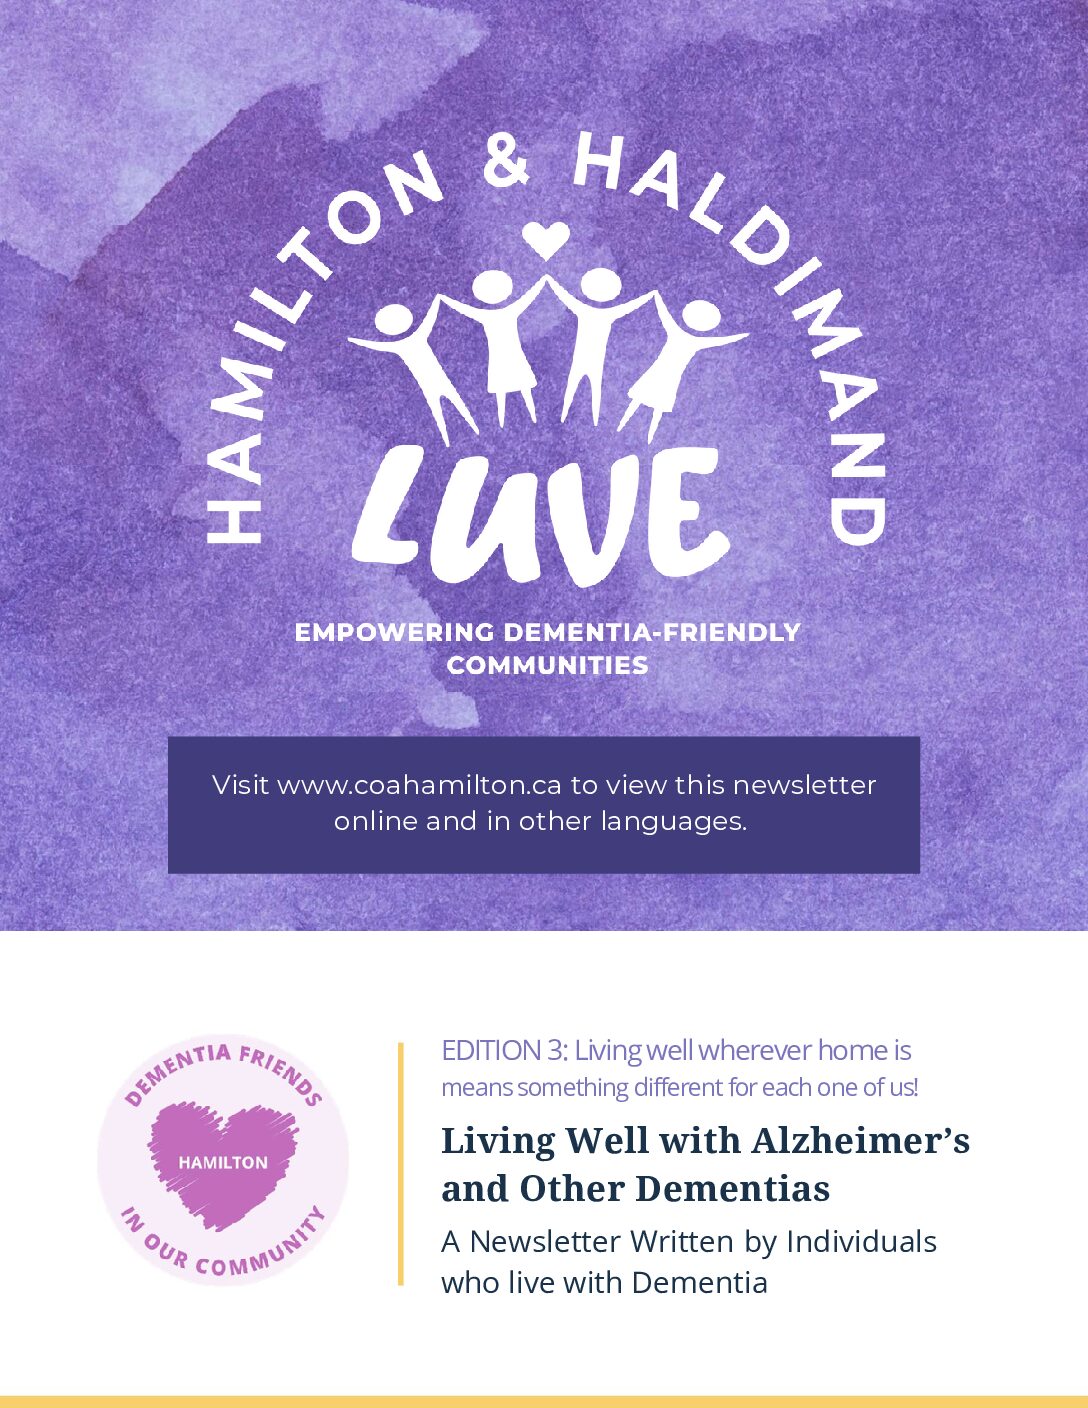 Dementia Friends Fall newsletter. Living well with Alzheimers and other dimentias.